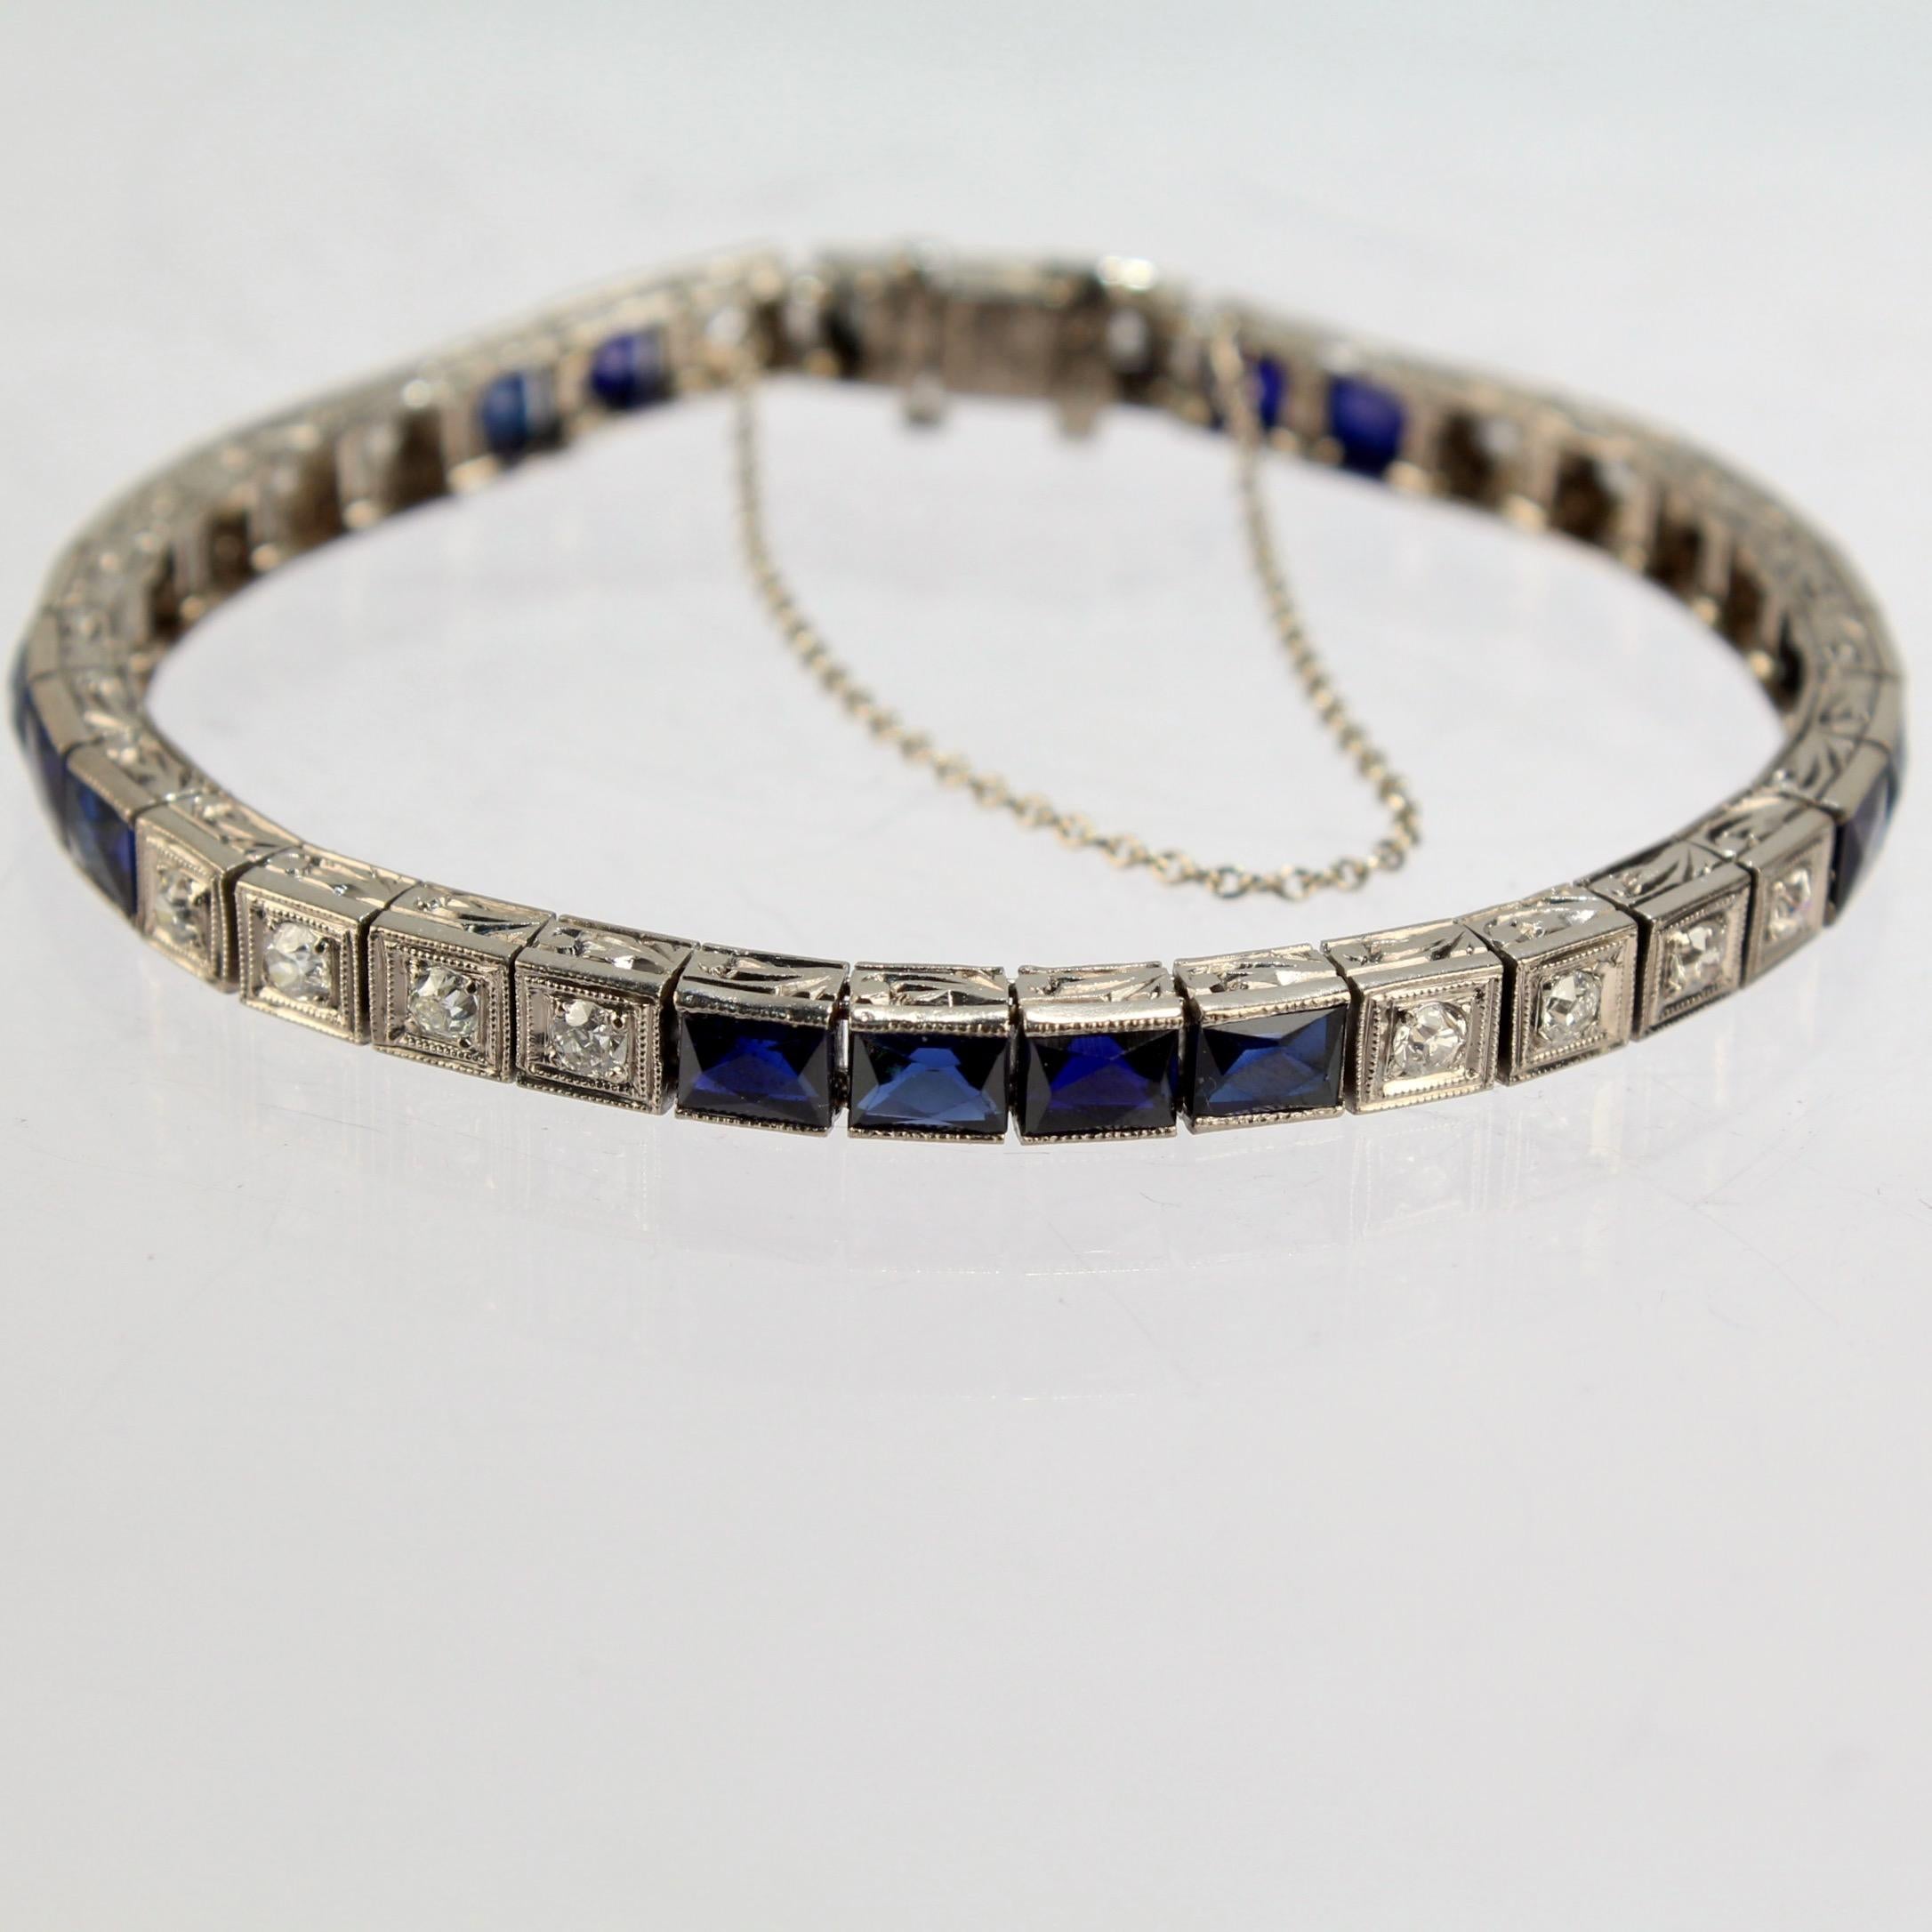 A very fine vintage Art Deco platinum, diamond, and sapphire tennis bracelet.

With alternating sets of four round-cut white diamonds and four French cut sapphires. 

Each stone is set in a separate link with engraved decoration to the sides.